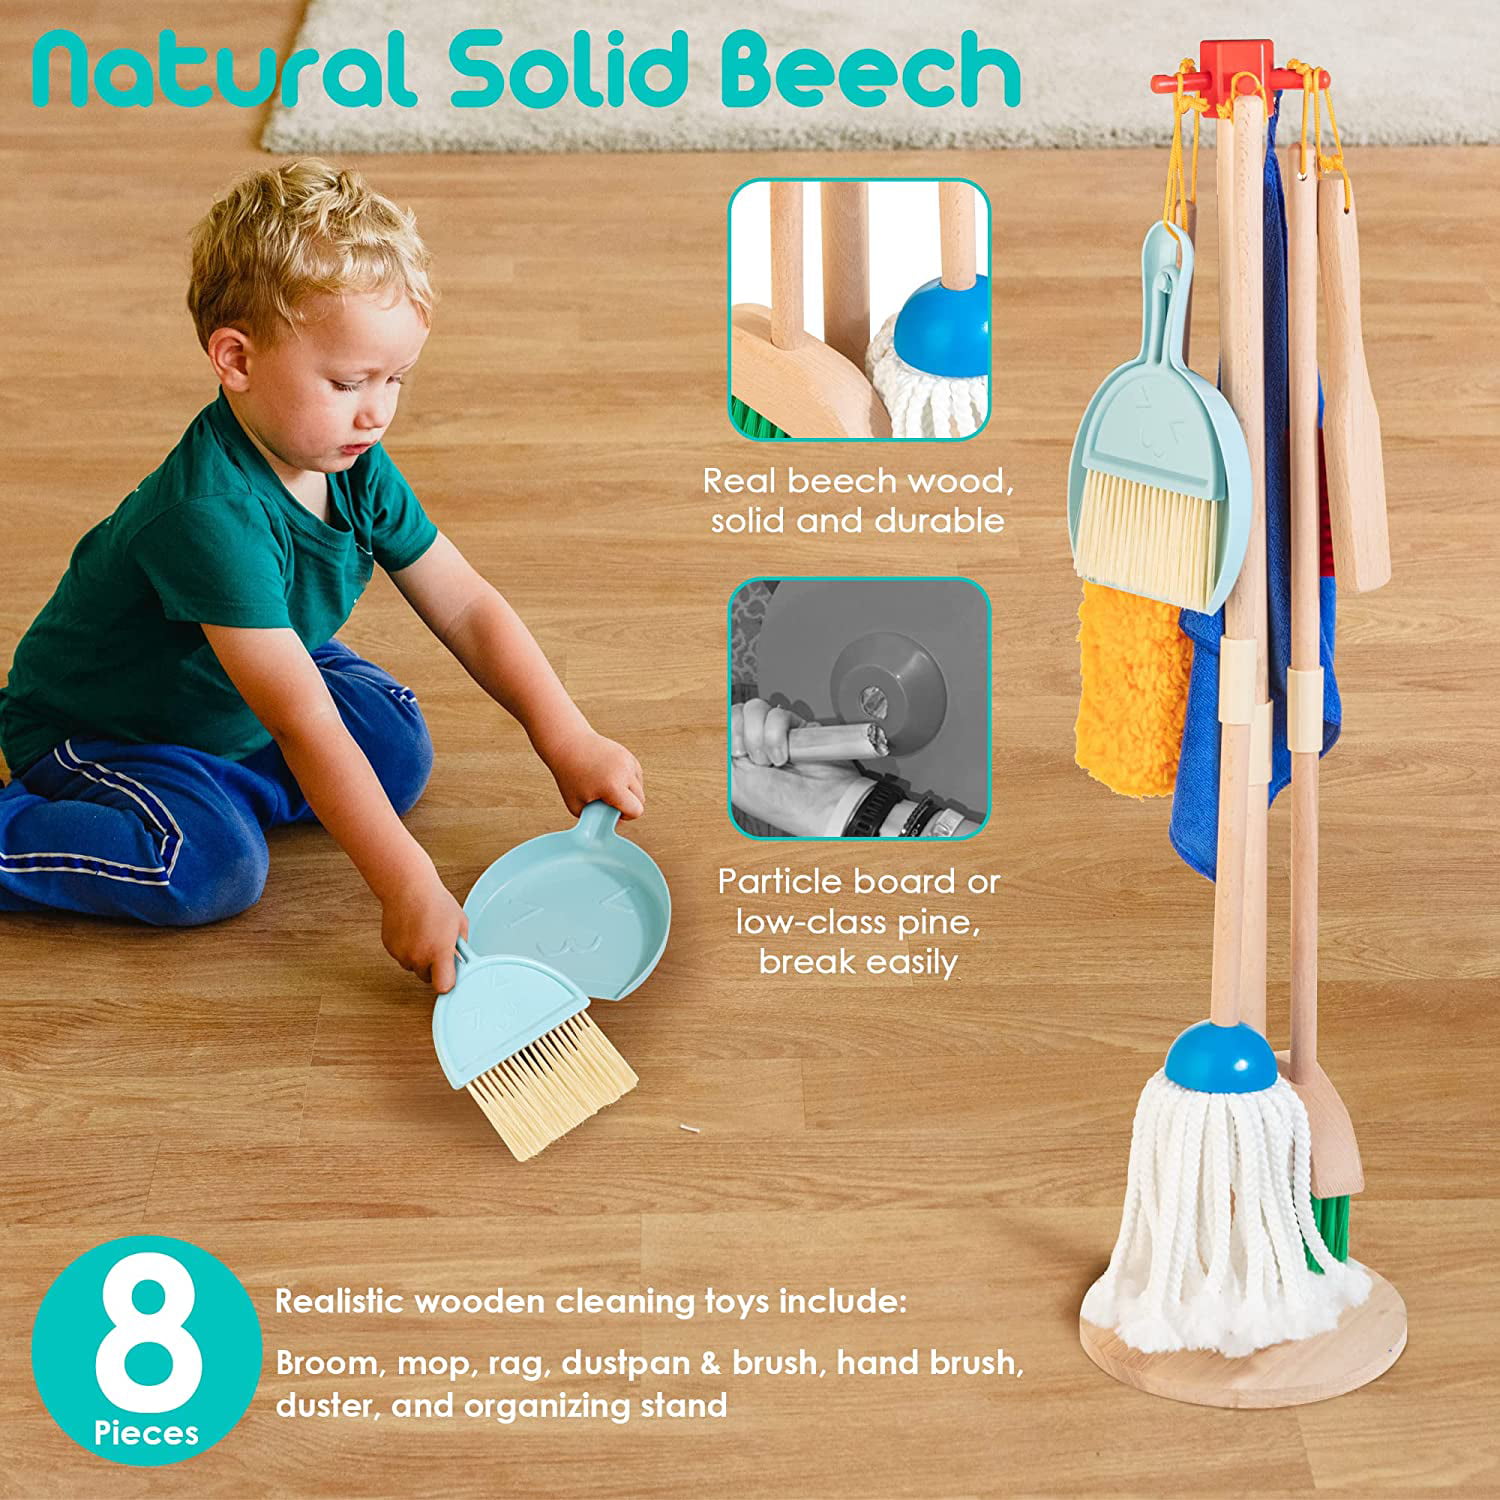  Kids Kitchen Cleaning Set - 7 Piece Kitchen Cleaning Toys  Includes Broom, Mop, Duster, Dustpan, Brush, Rag and Hanging Stand, -  Kitchen Toy Toddler Cleaning Set Gift for Toddler Girls 